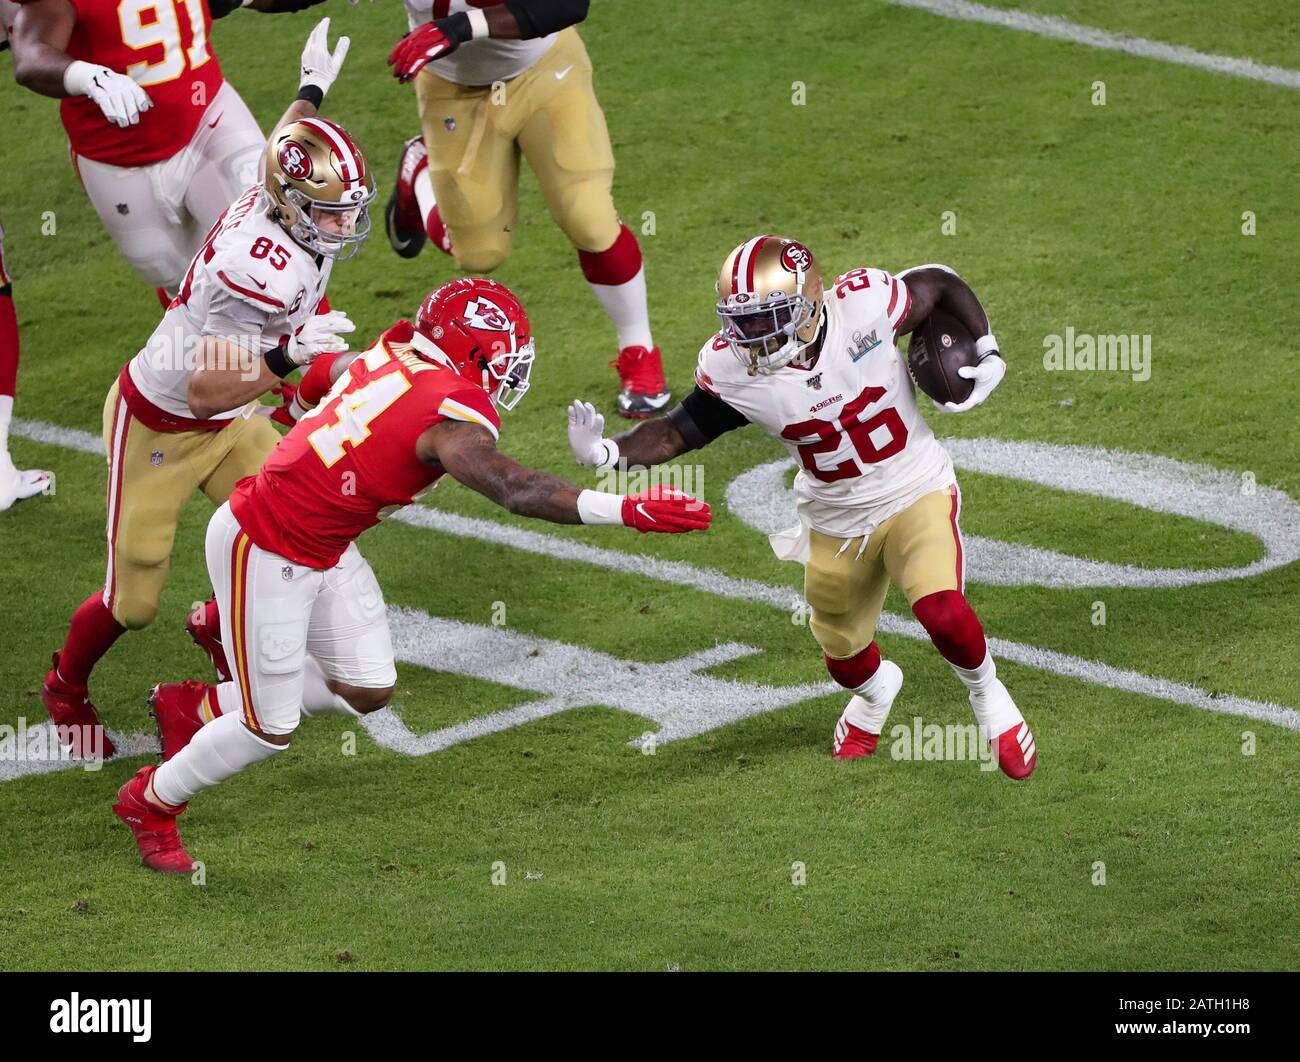 Miami Gardens, Florida, USA. 02nd Feb, 2020. San Francisco 49ers running back Tevin Coleman (26) runs with the ball pressured by Kansas City Chiefs outside linebacker Damien Wilson (54) during the Super Bowl LIV at the Hard Rock Stadium in Miami Gardens, Florida. Mario Houben/CSM/Alamy Live News Stock Photo